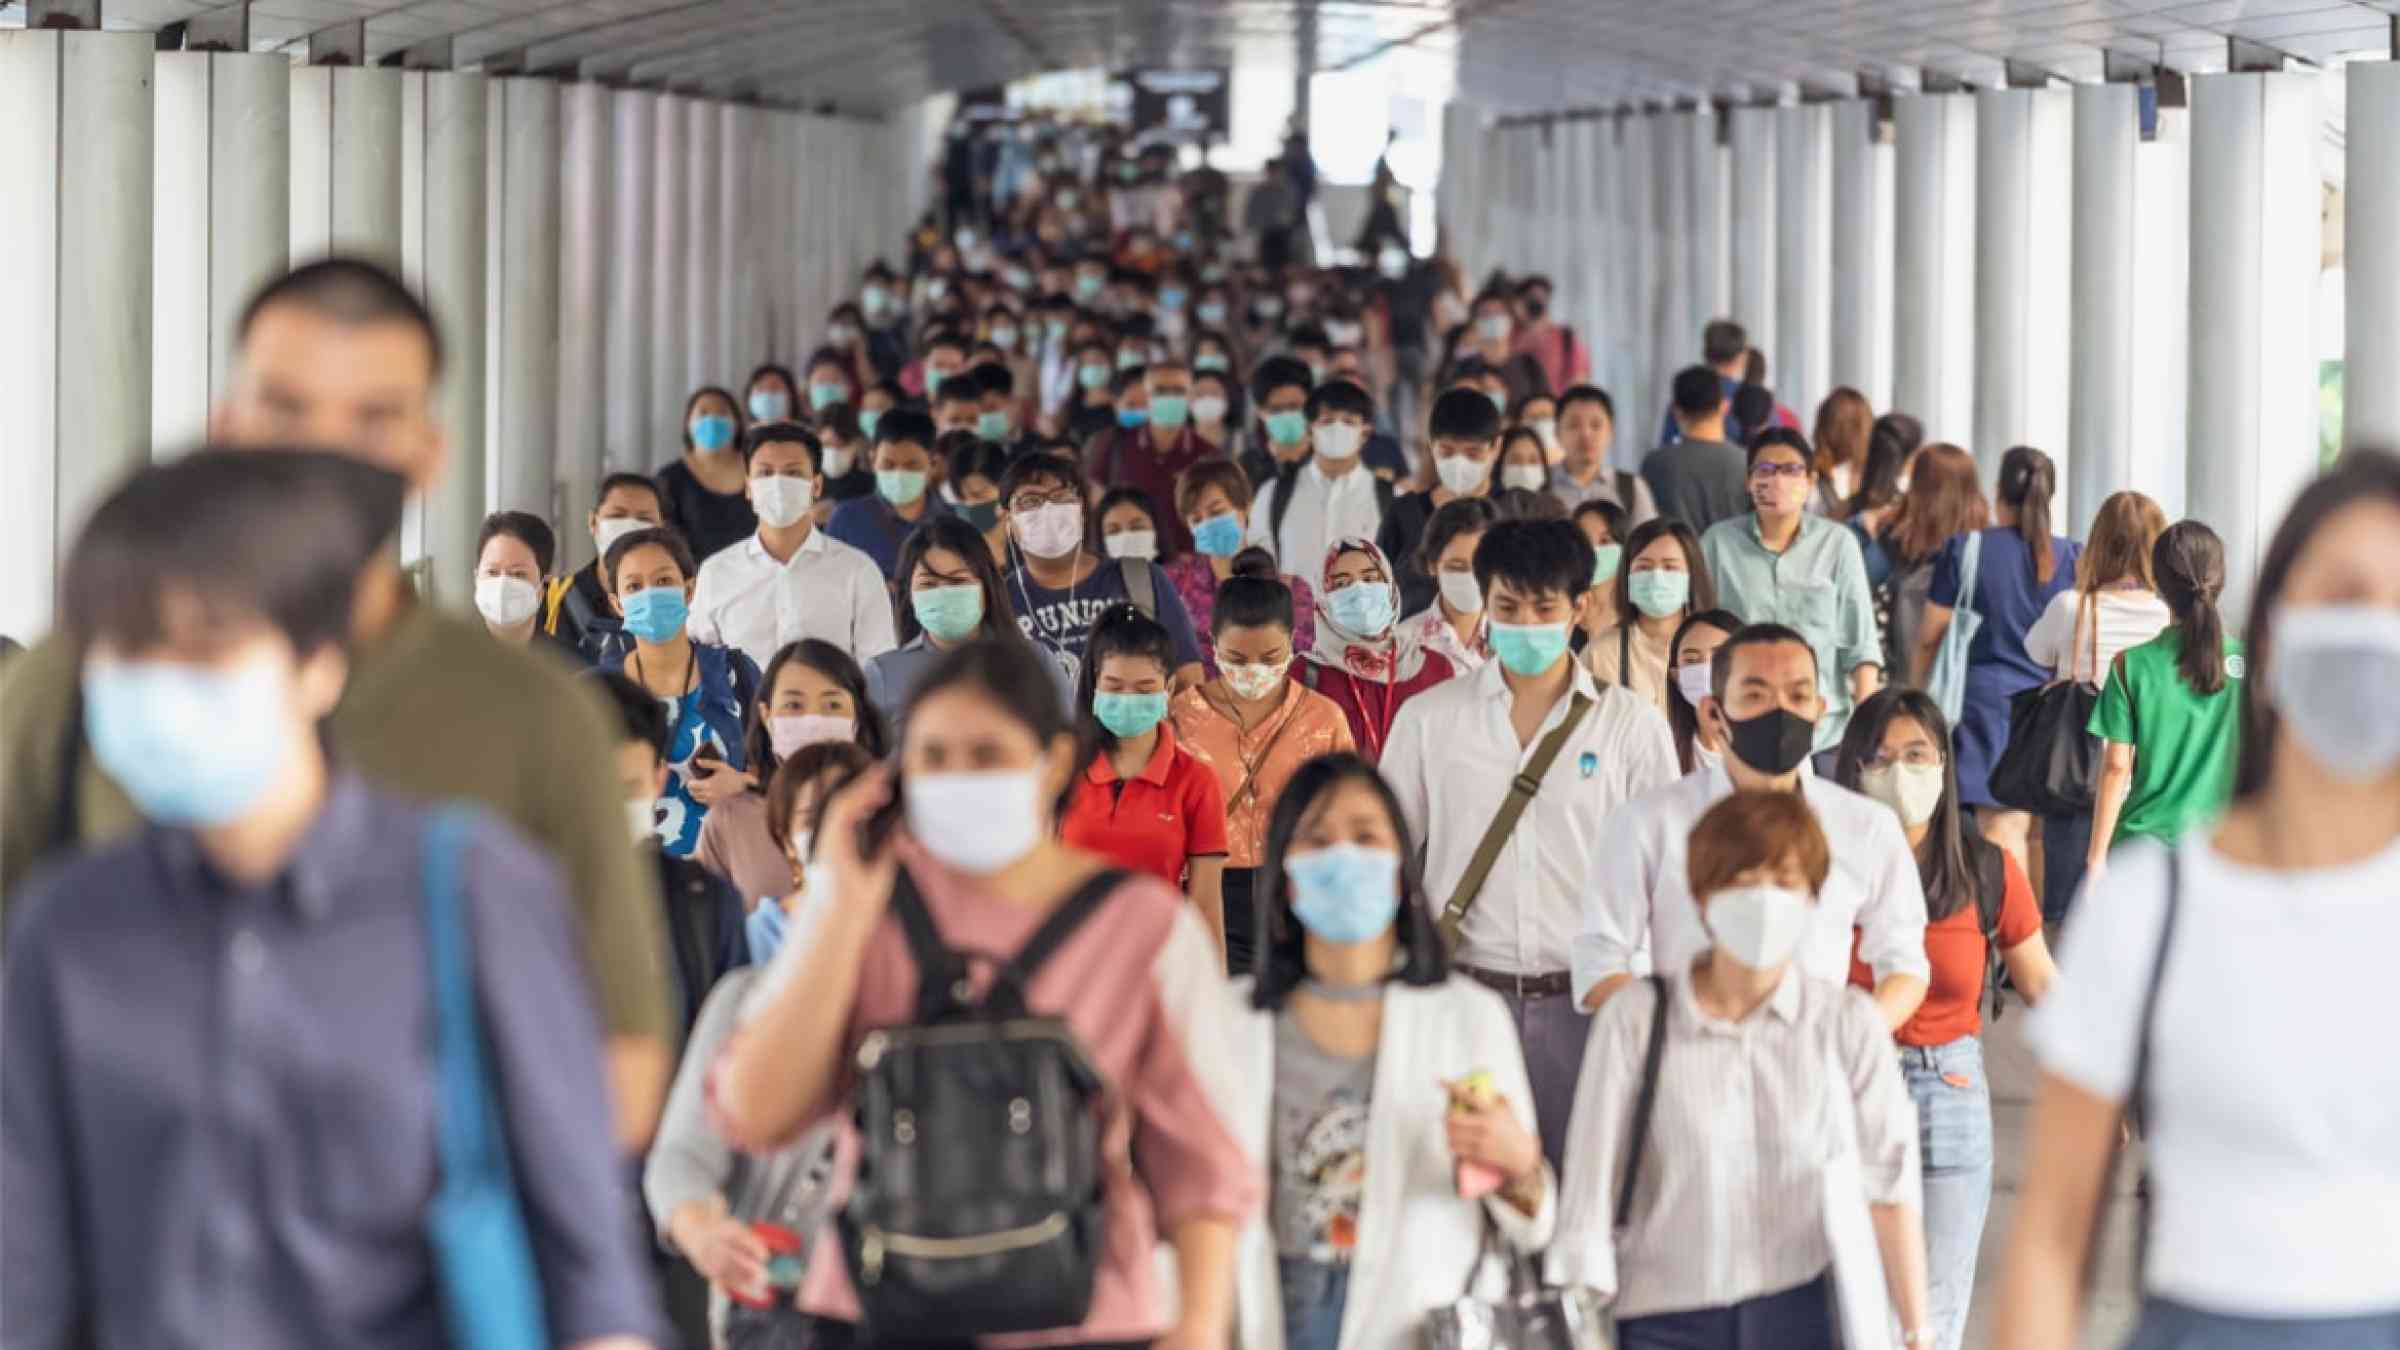 Crowd surgical mask to prevent COVID-19 transmission